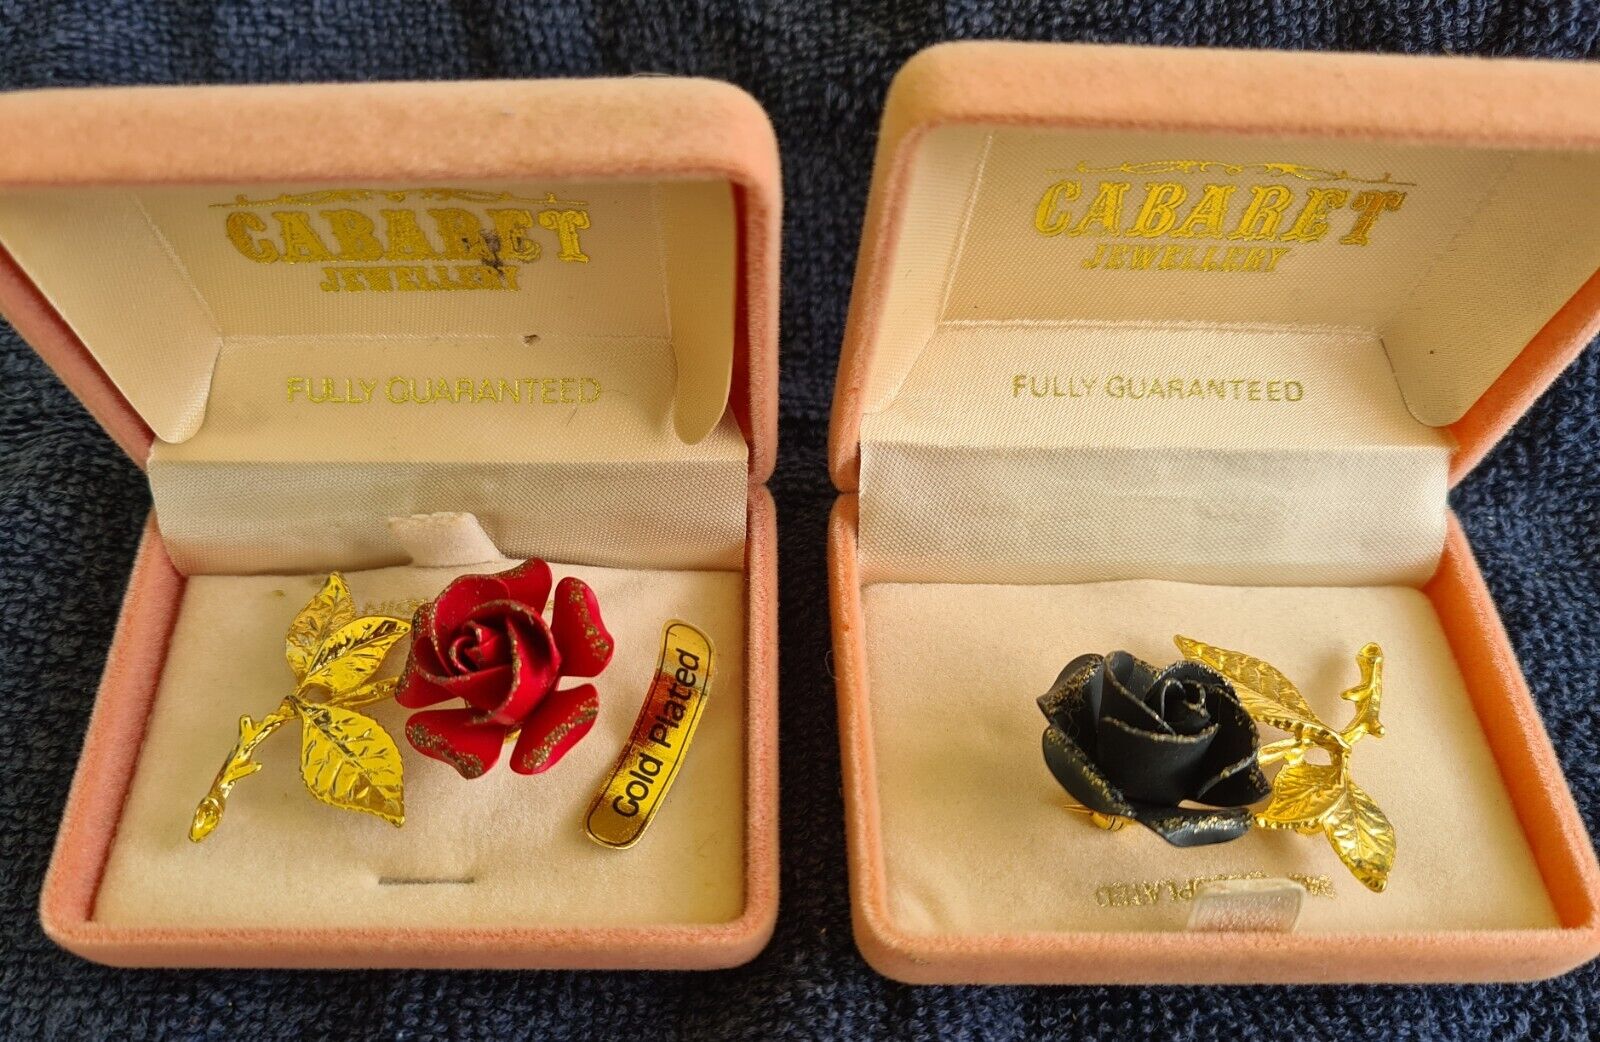 Pair (2) CABARET Gold Plated Jewellery Black & Red Rose Dress Pins C.1987+ BOXED